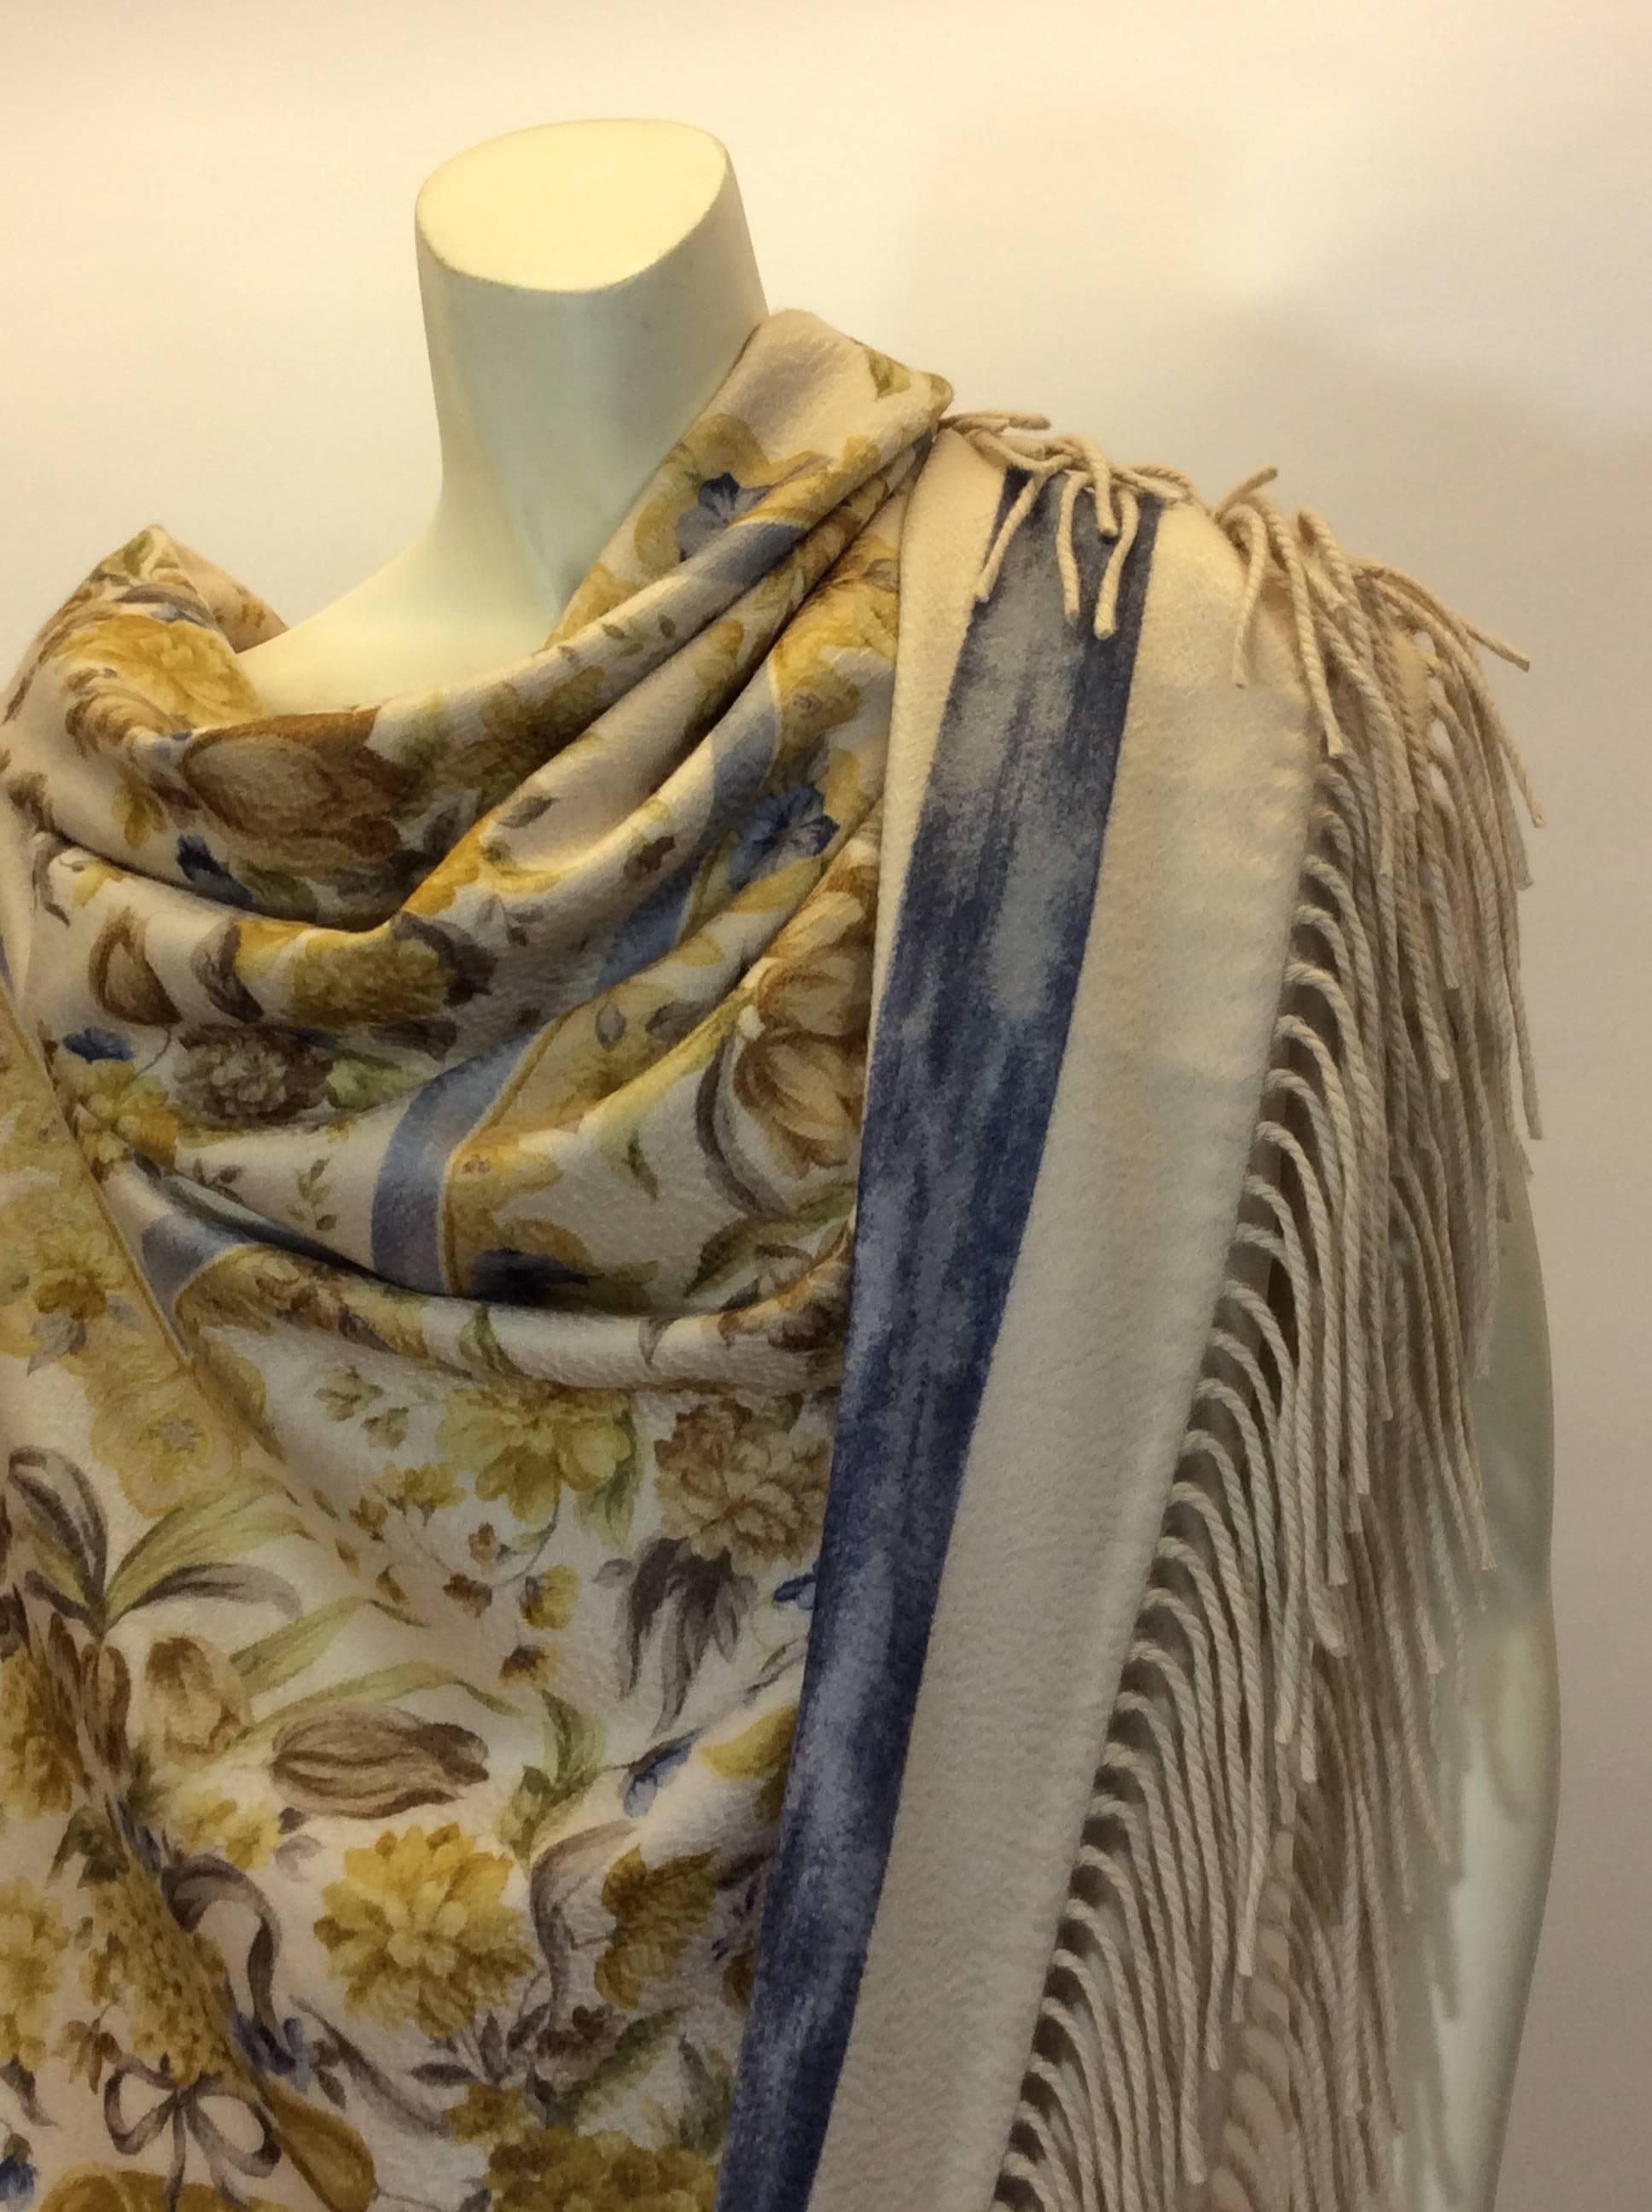 Loro Piana NWT Cream Floral Printed Cashmere Shawl
Style name: Scialle Savonnerie
FAB0879-T378
Made in Italy
100% Cashmere
Cream shawl with blue and yellow floral design
Fringe trim
60 inches in length, 57 inches wide
NWT original price: 2,150 Our